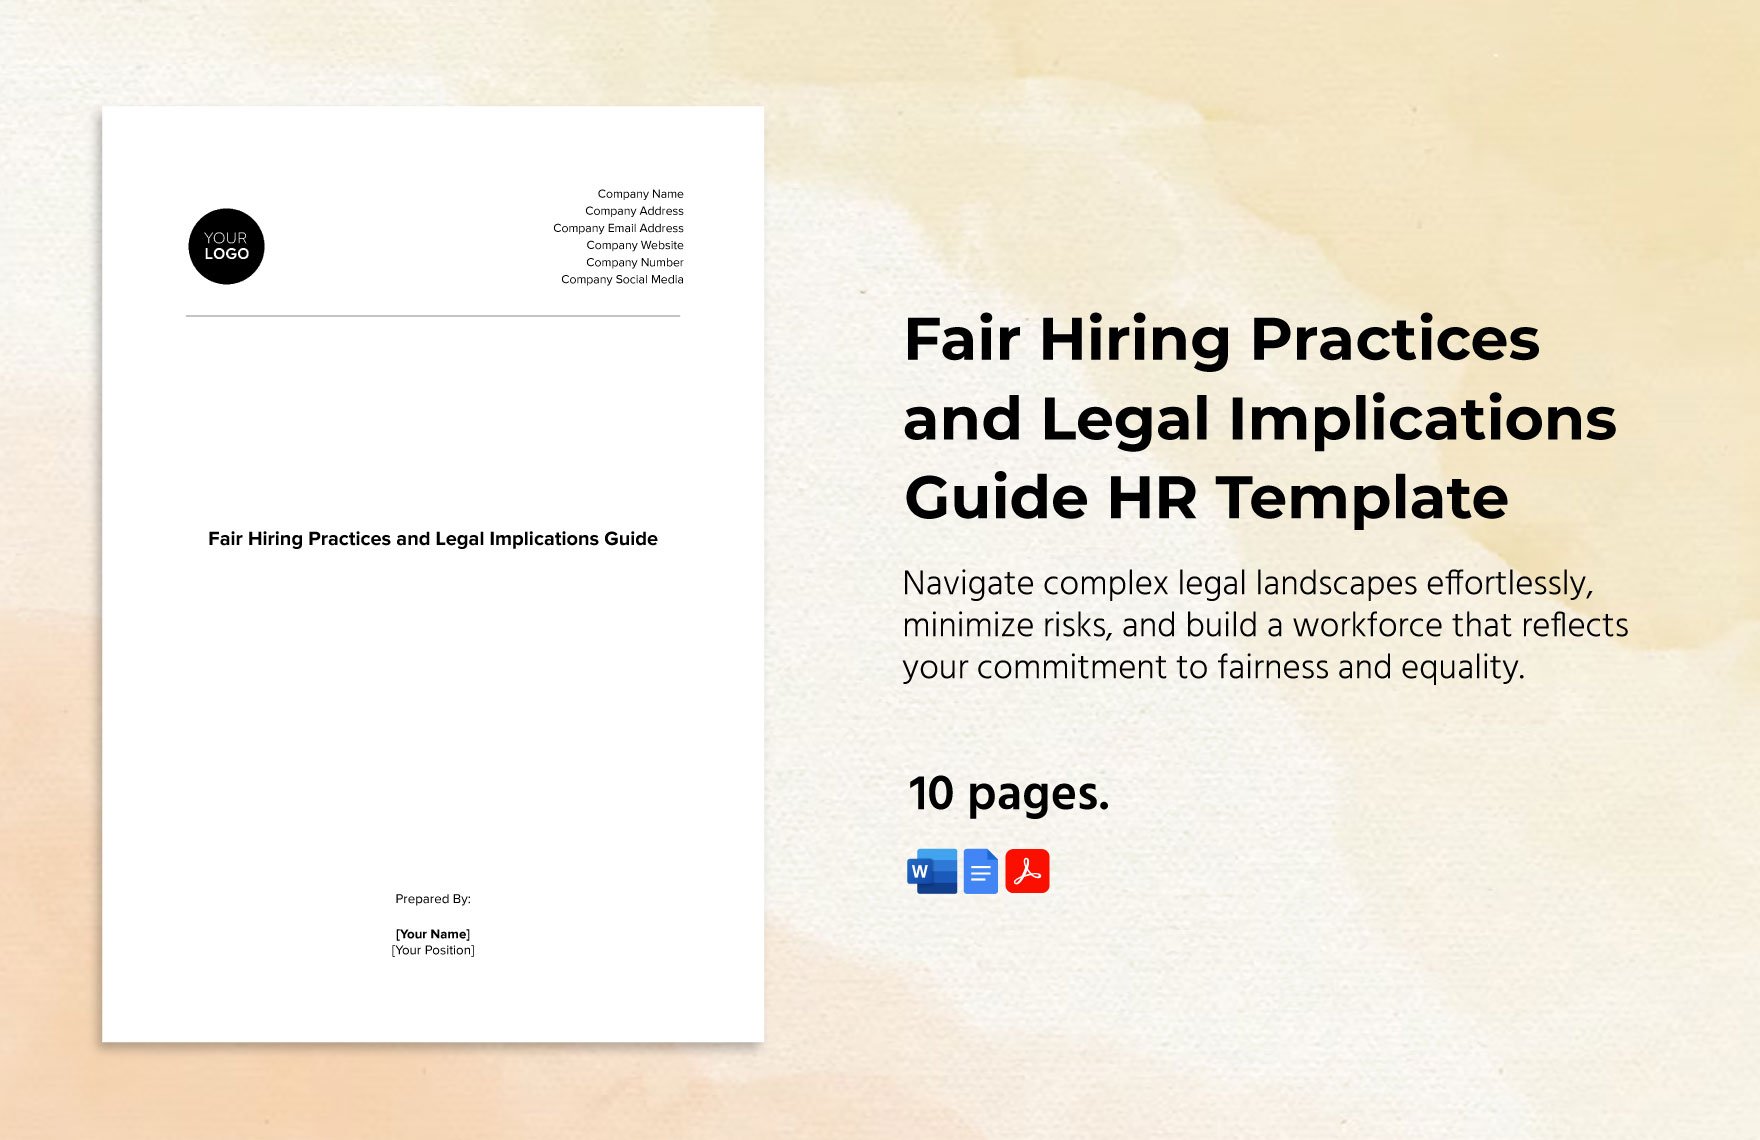 Fair Hiring Practices and Legal Implications Guide HR Template in Word, Google Docs, PDF